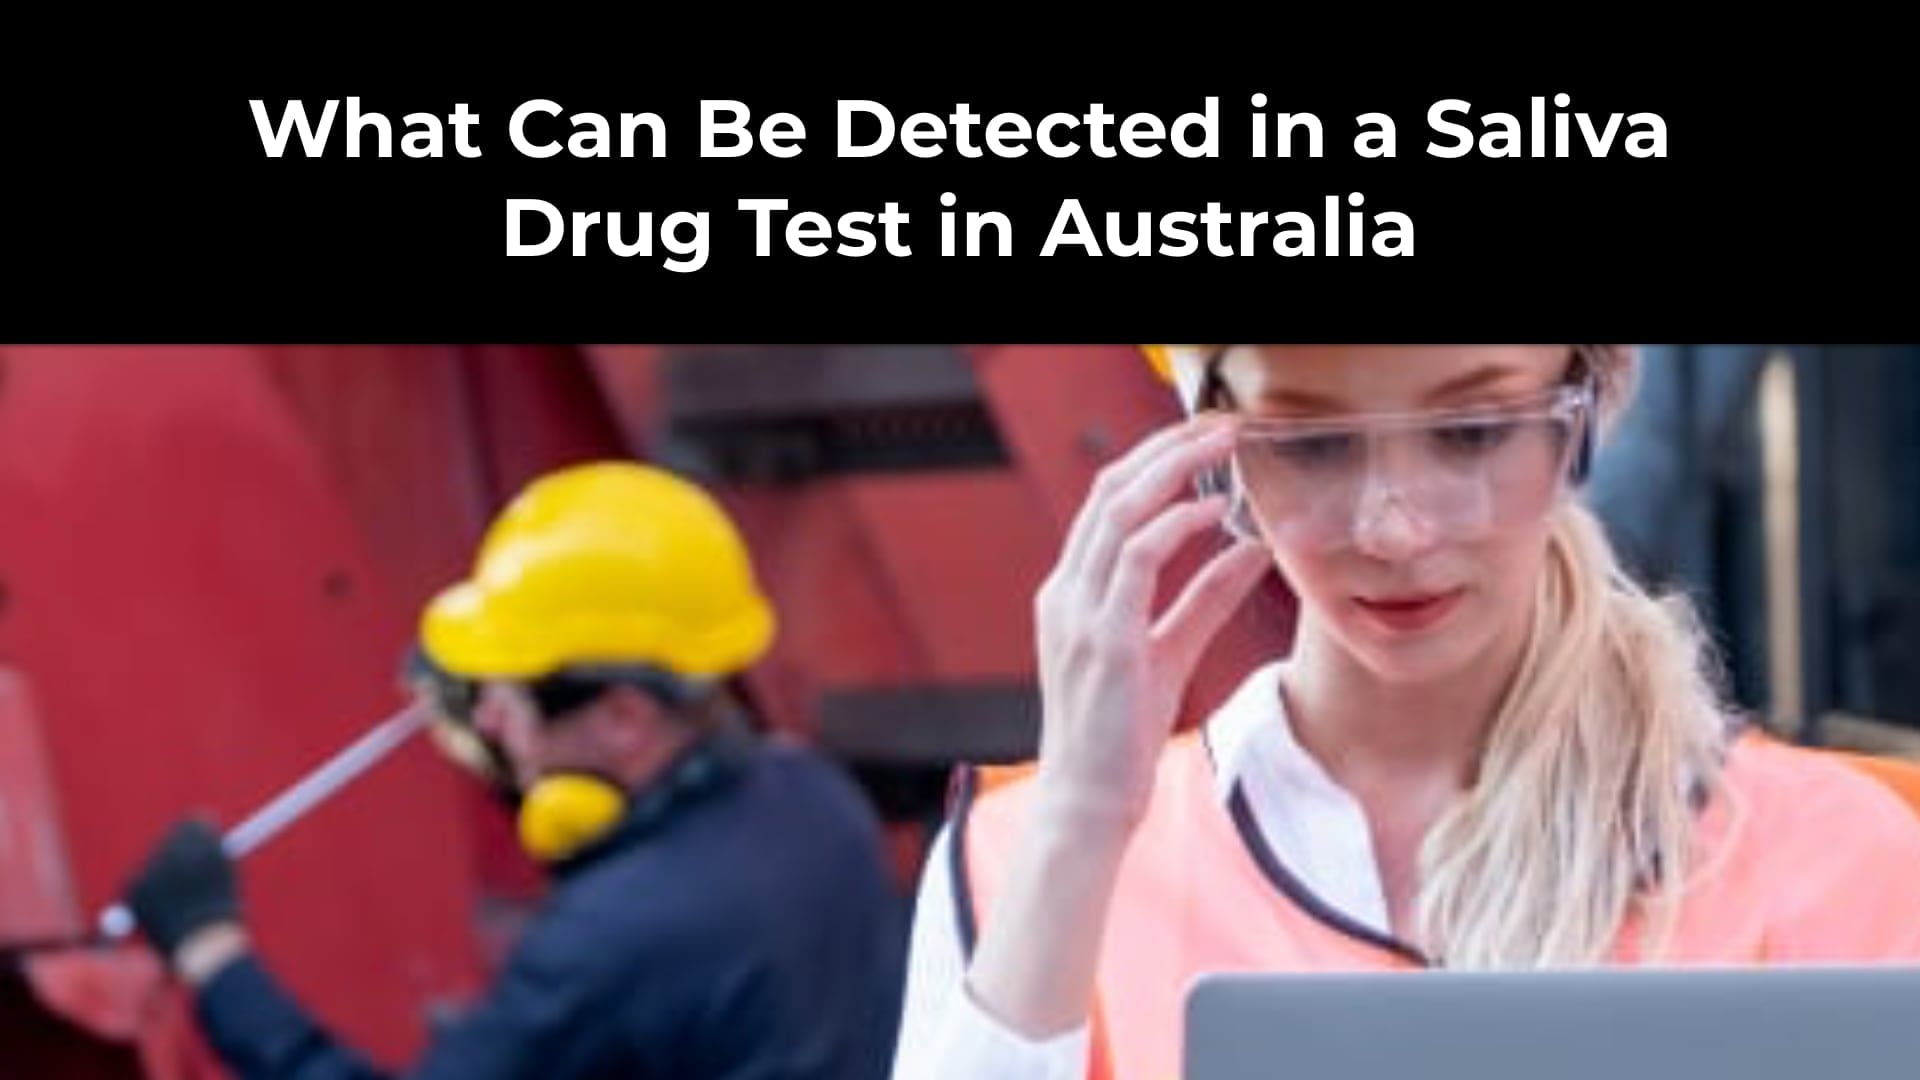 What Can Be Detected in a Saliva Drug Test in Australia